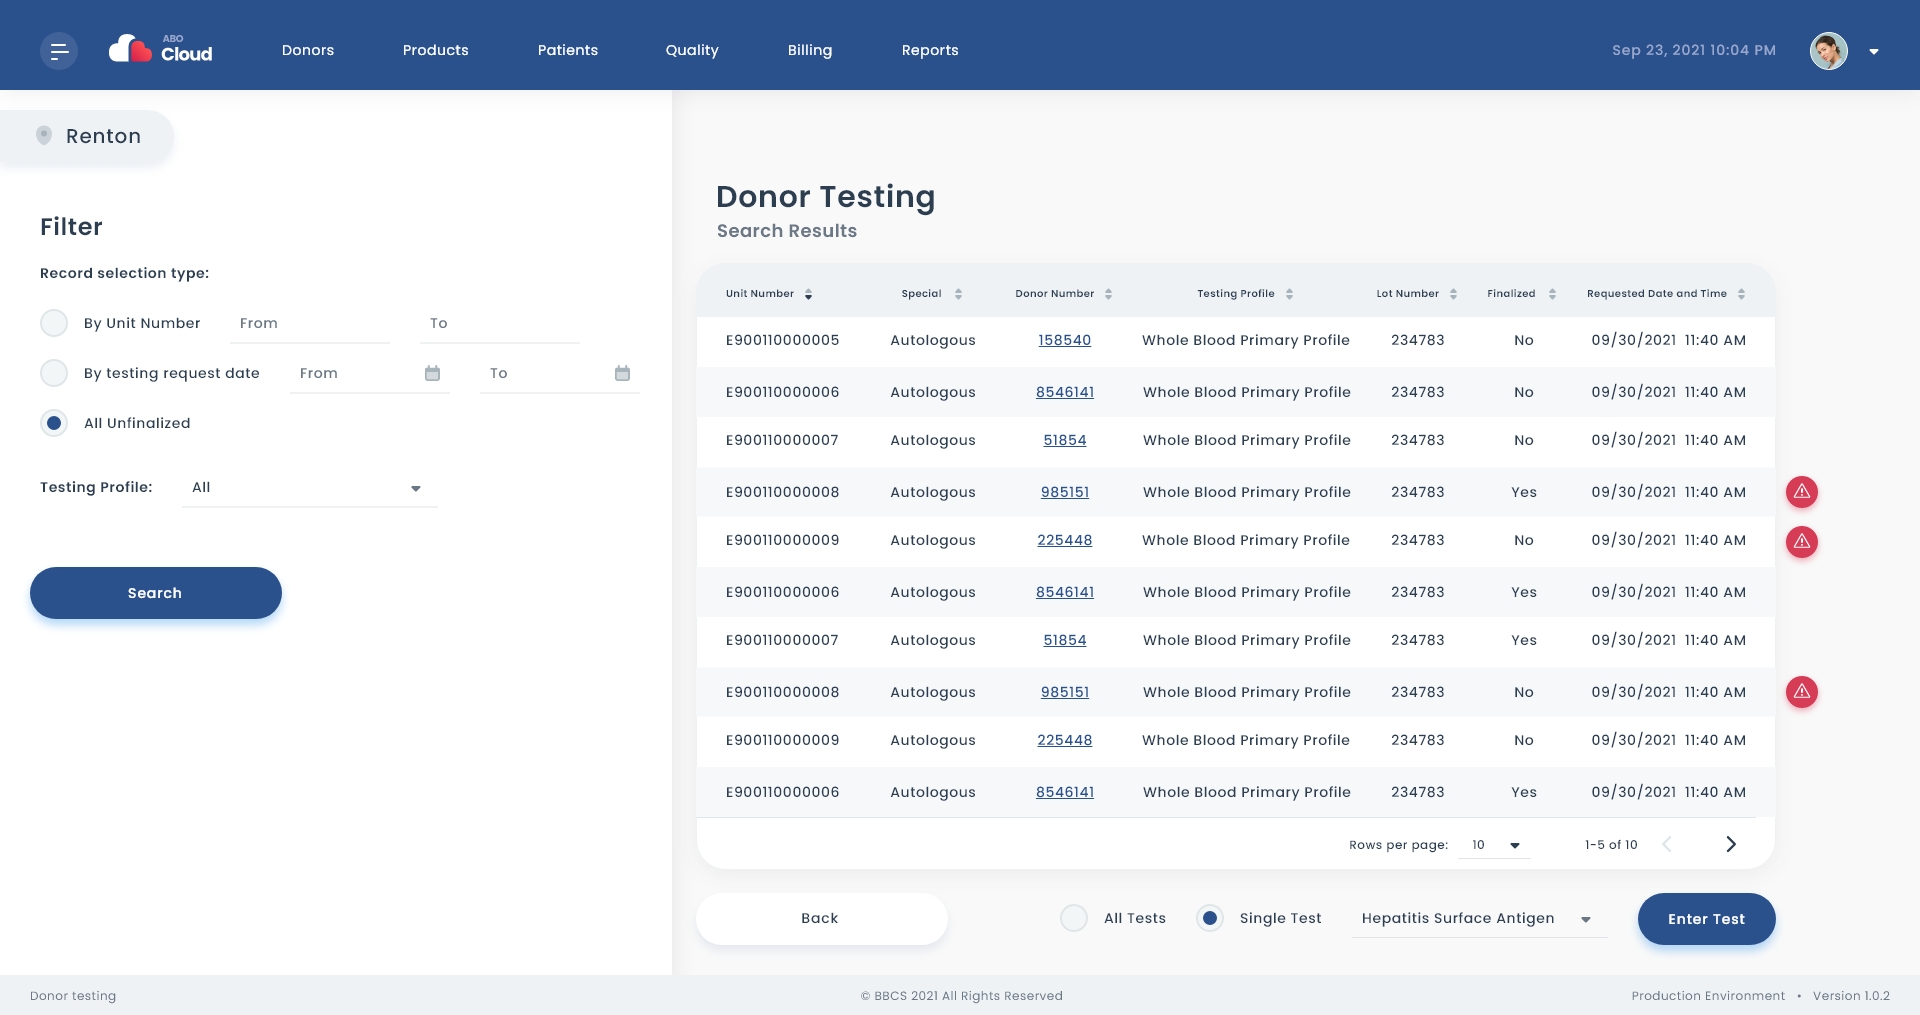 Donor Testing Search screen with options for indicating single test entry or all test entry.